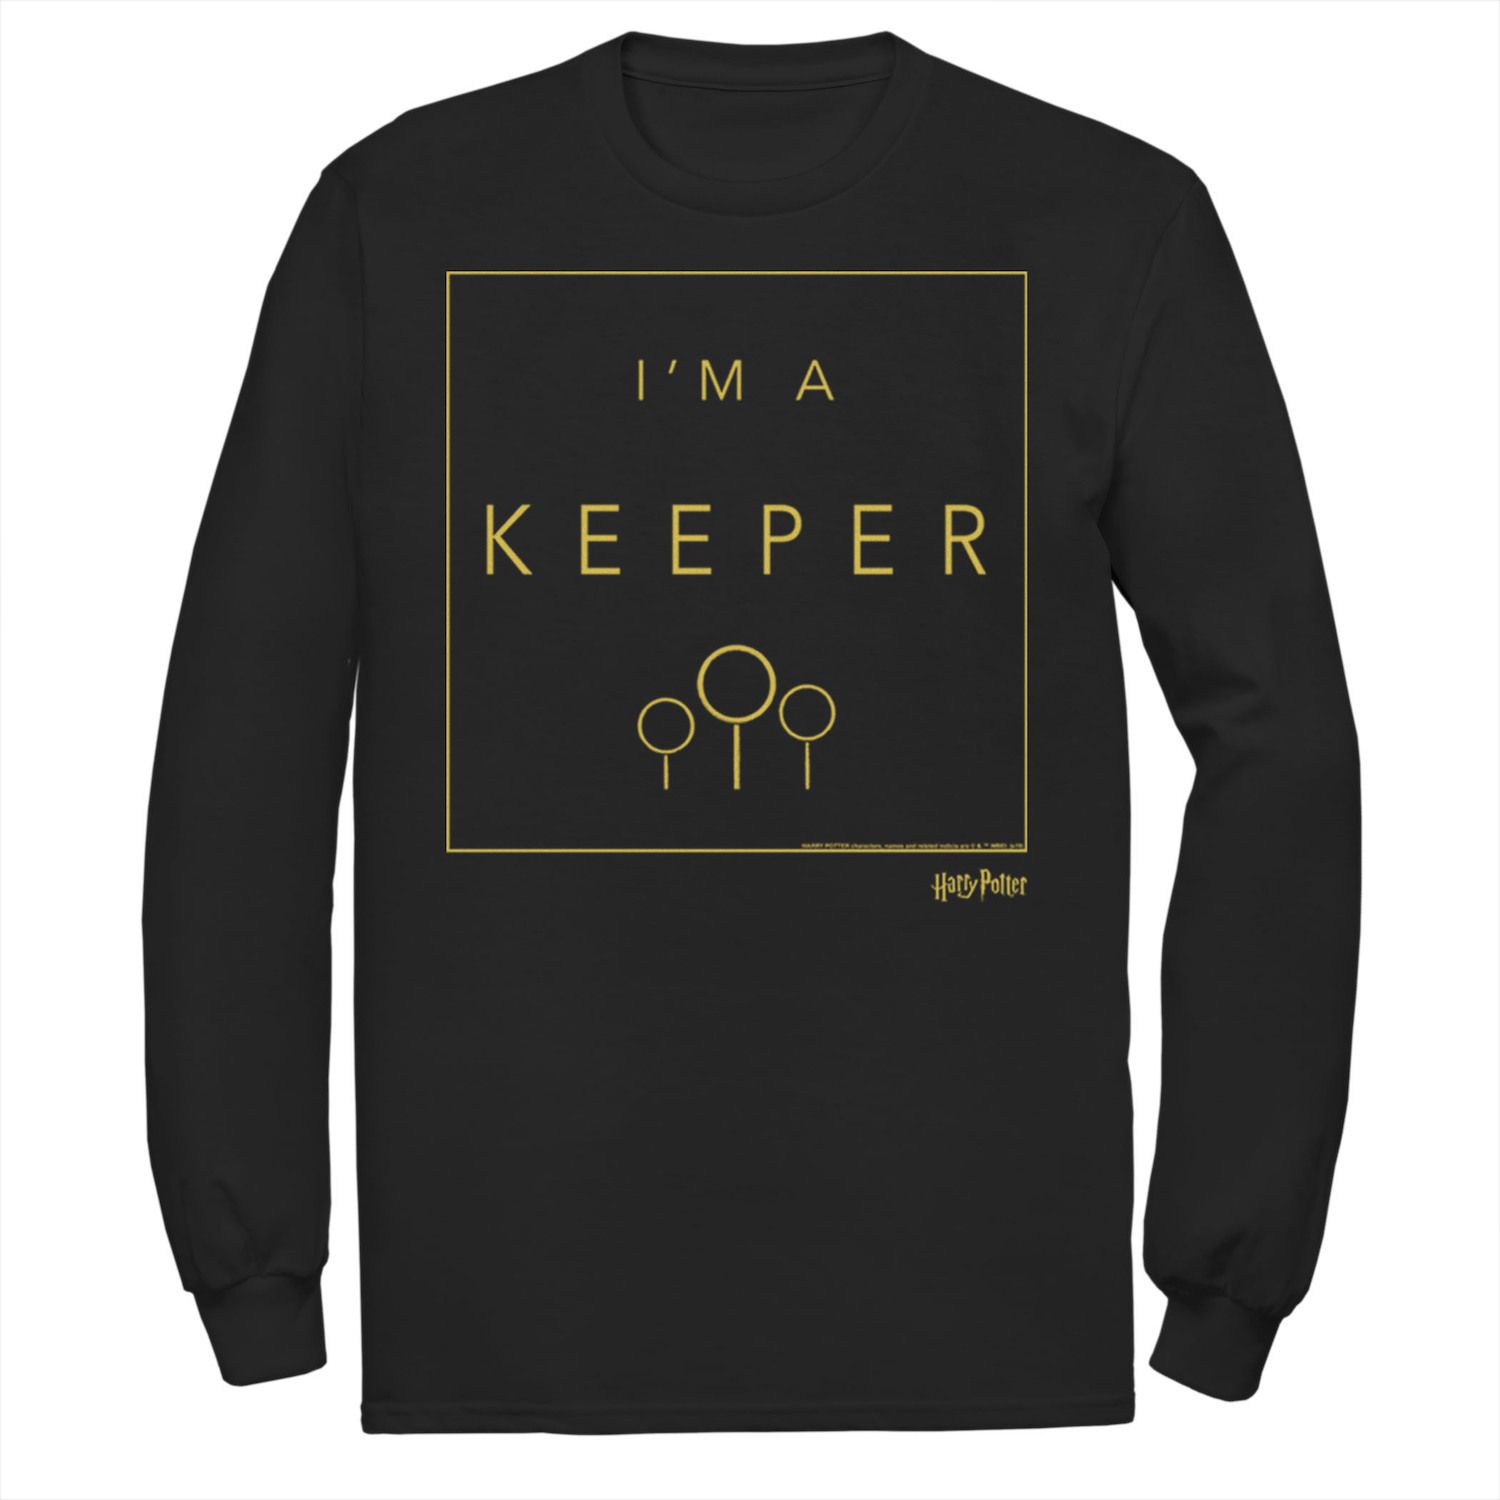 Image for Harry Potter Men's Quidditch I'm A Keeper Tee at Kohl's.